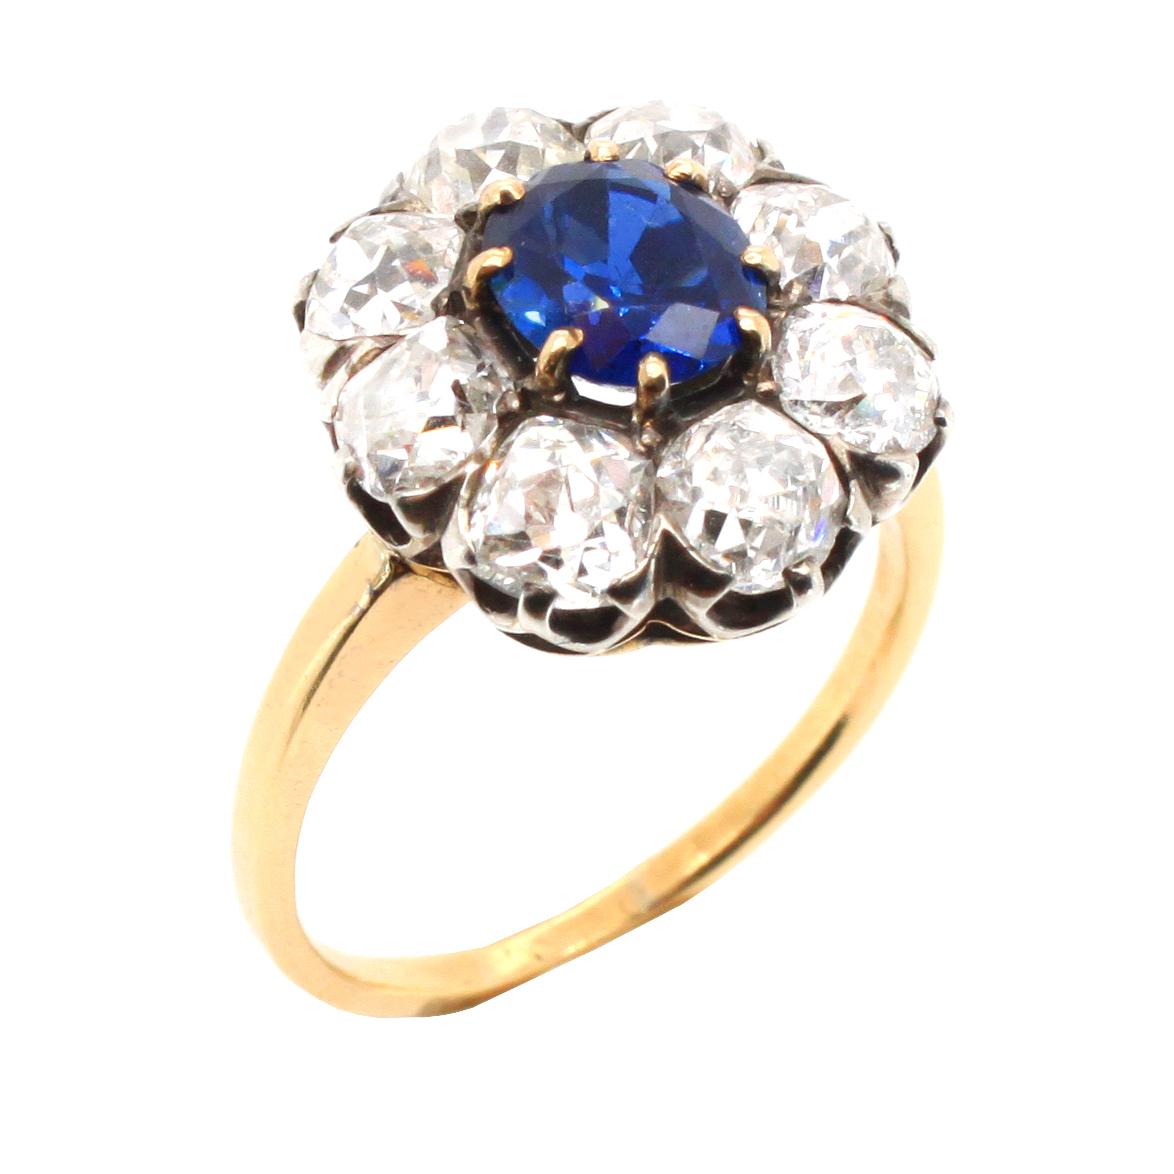 An antique Victorian sapphire and diamond cluster ring, ca. 1880s. The central cushion shaped sapphire weighs circa 1.5 carats and is a natural, not heat treated, gemstone -  accompanied by a gemological certificate. It is surround by a diamond